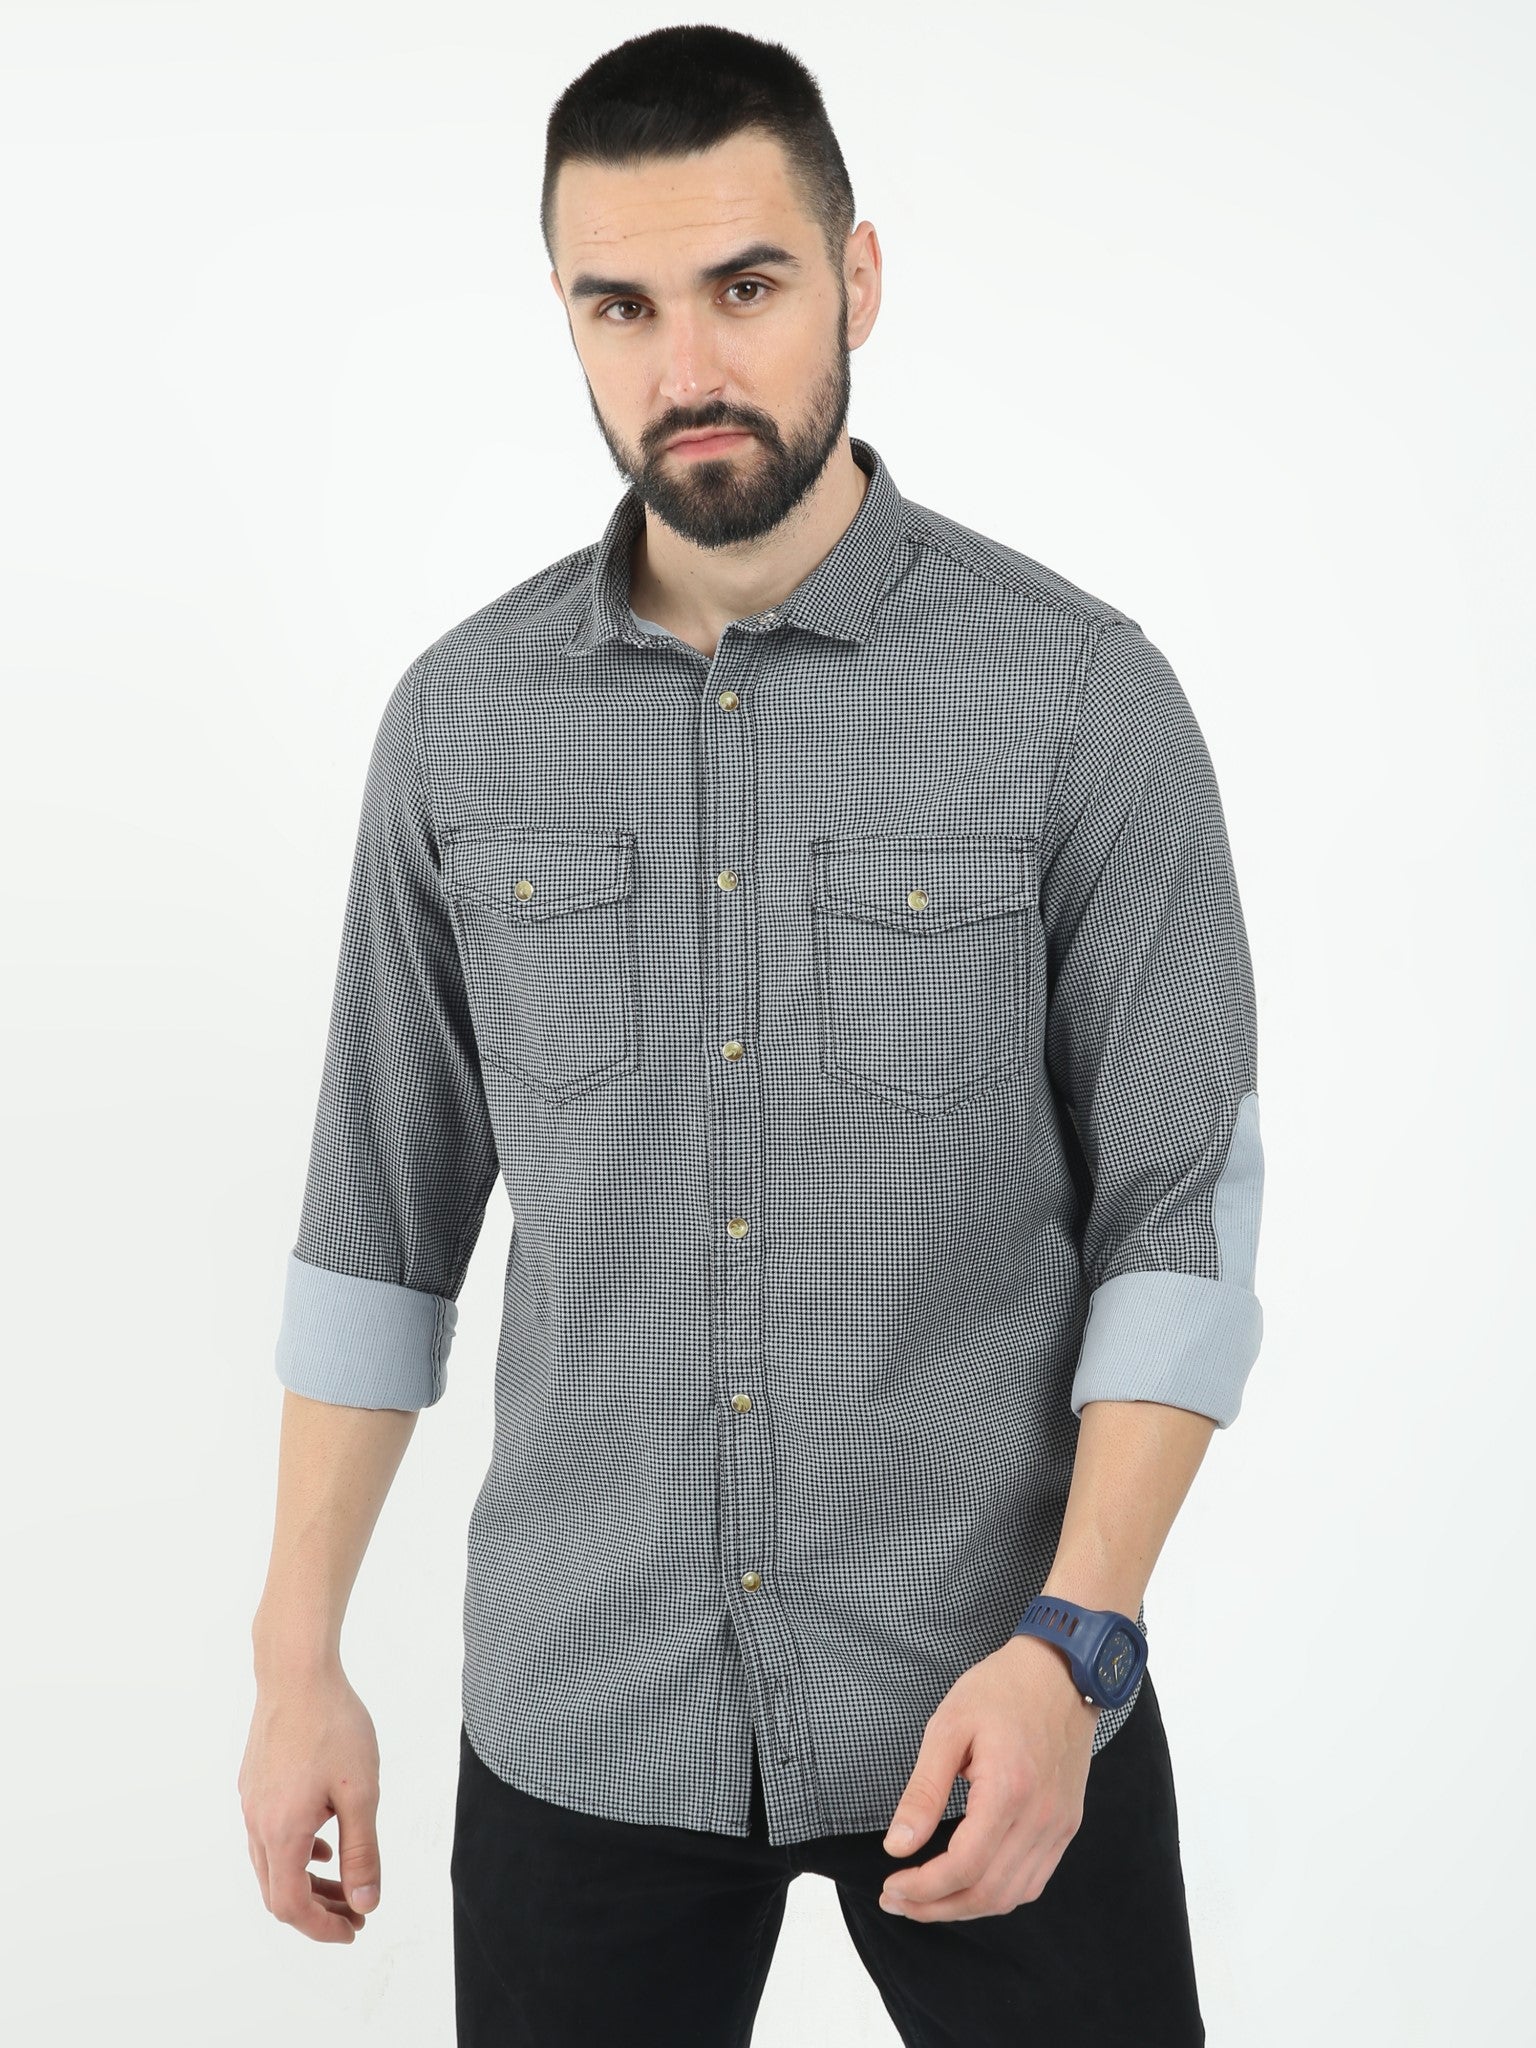 Elbow Patch Grey Shirt for Men